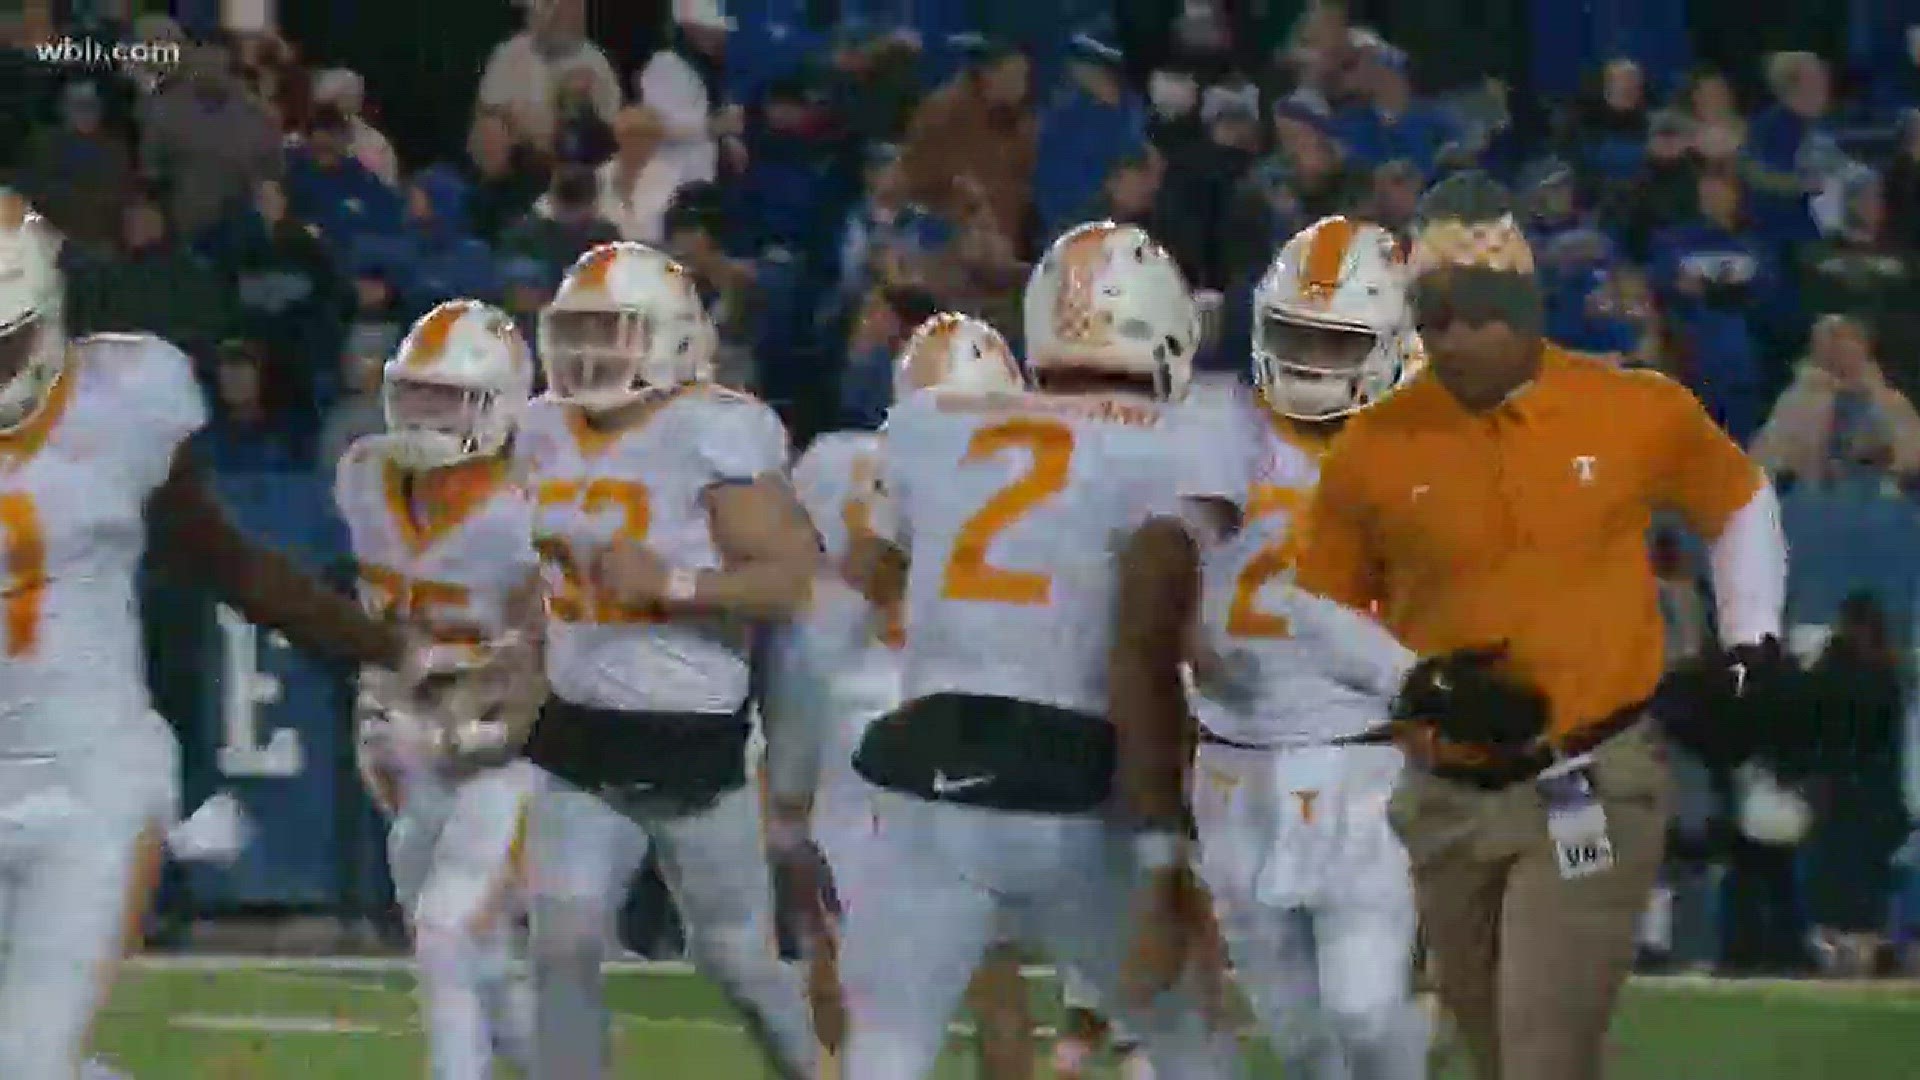 This was one of those games you circled at the beginning of the season. Now Tennessee is fighting for a postseason